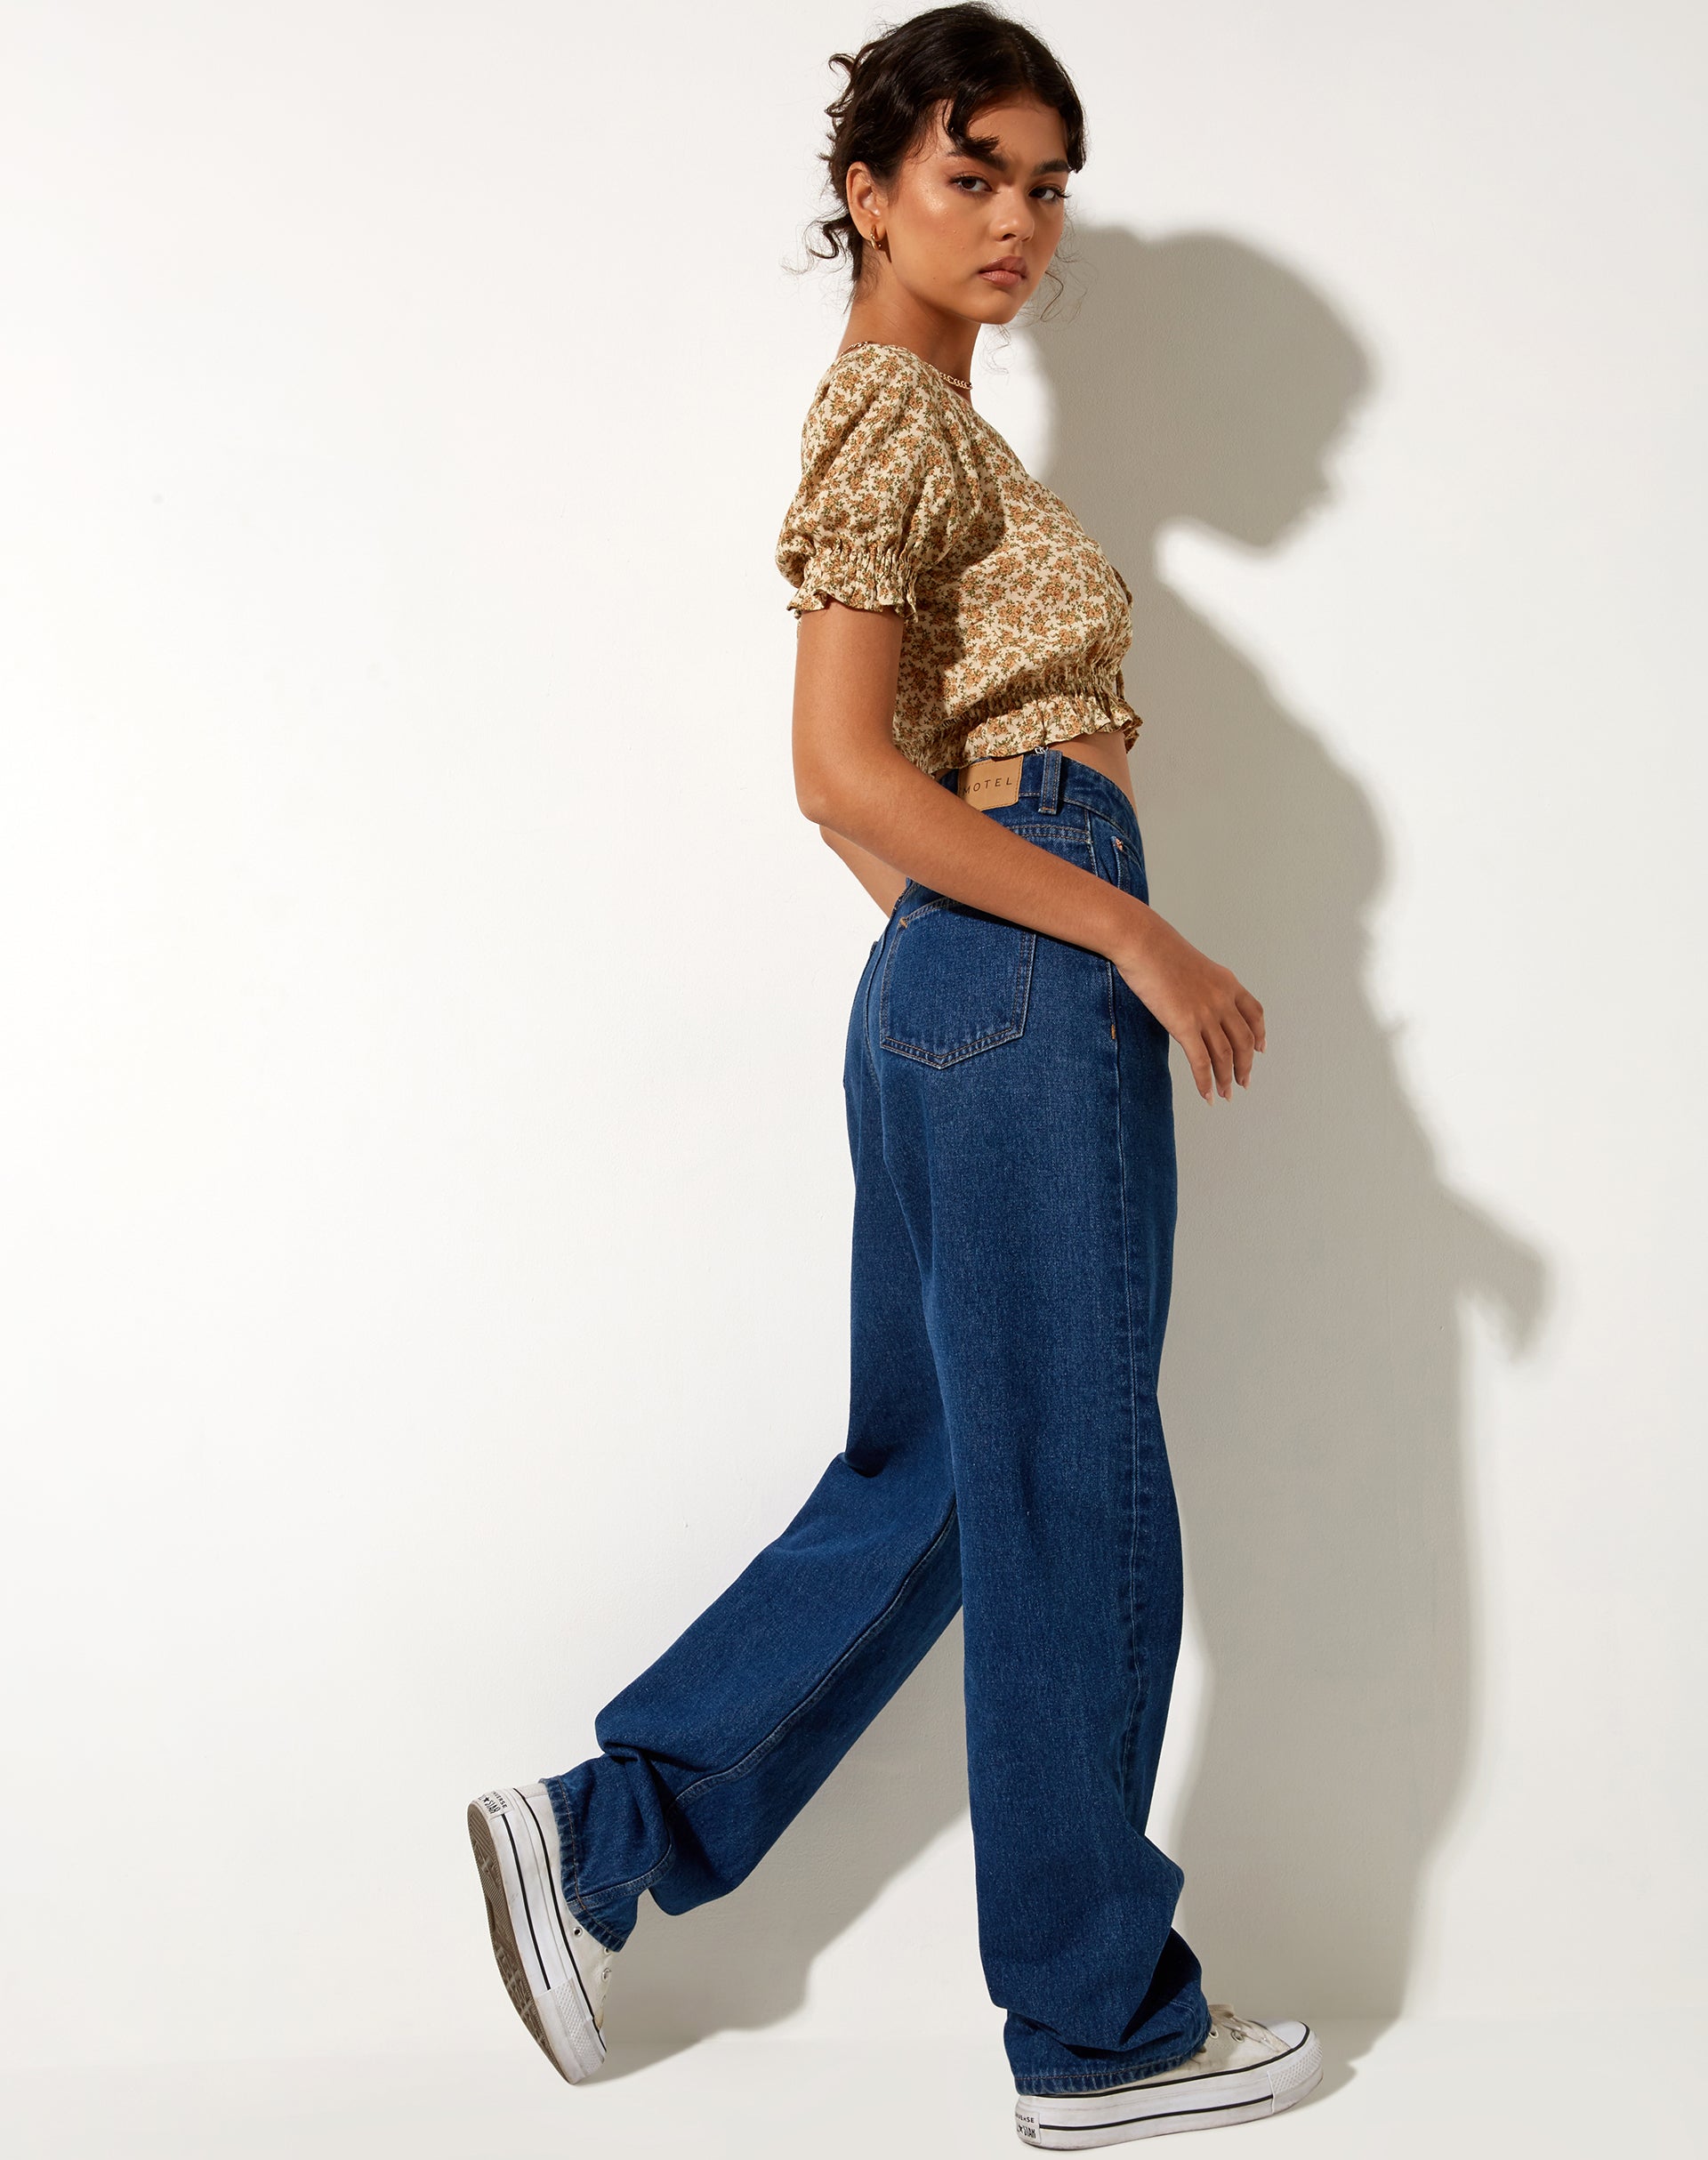 Image of Aley Crop Top in Washed Ditsy